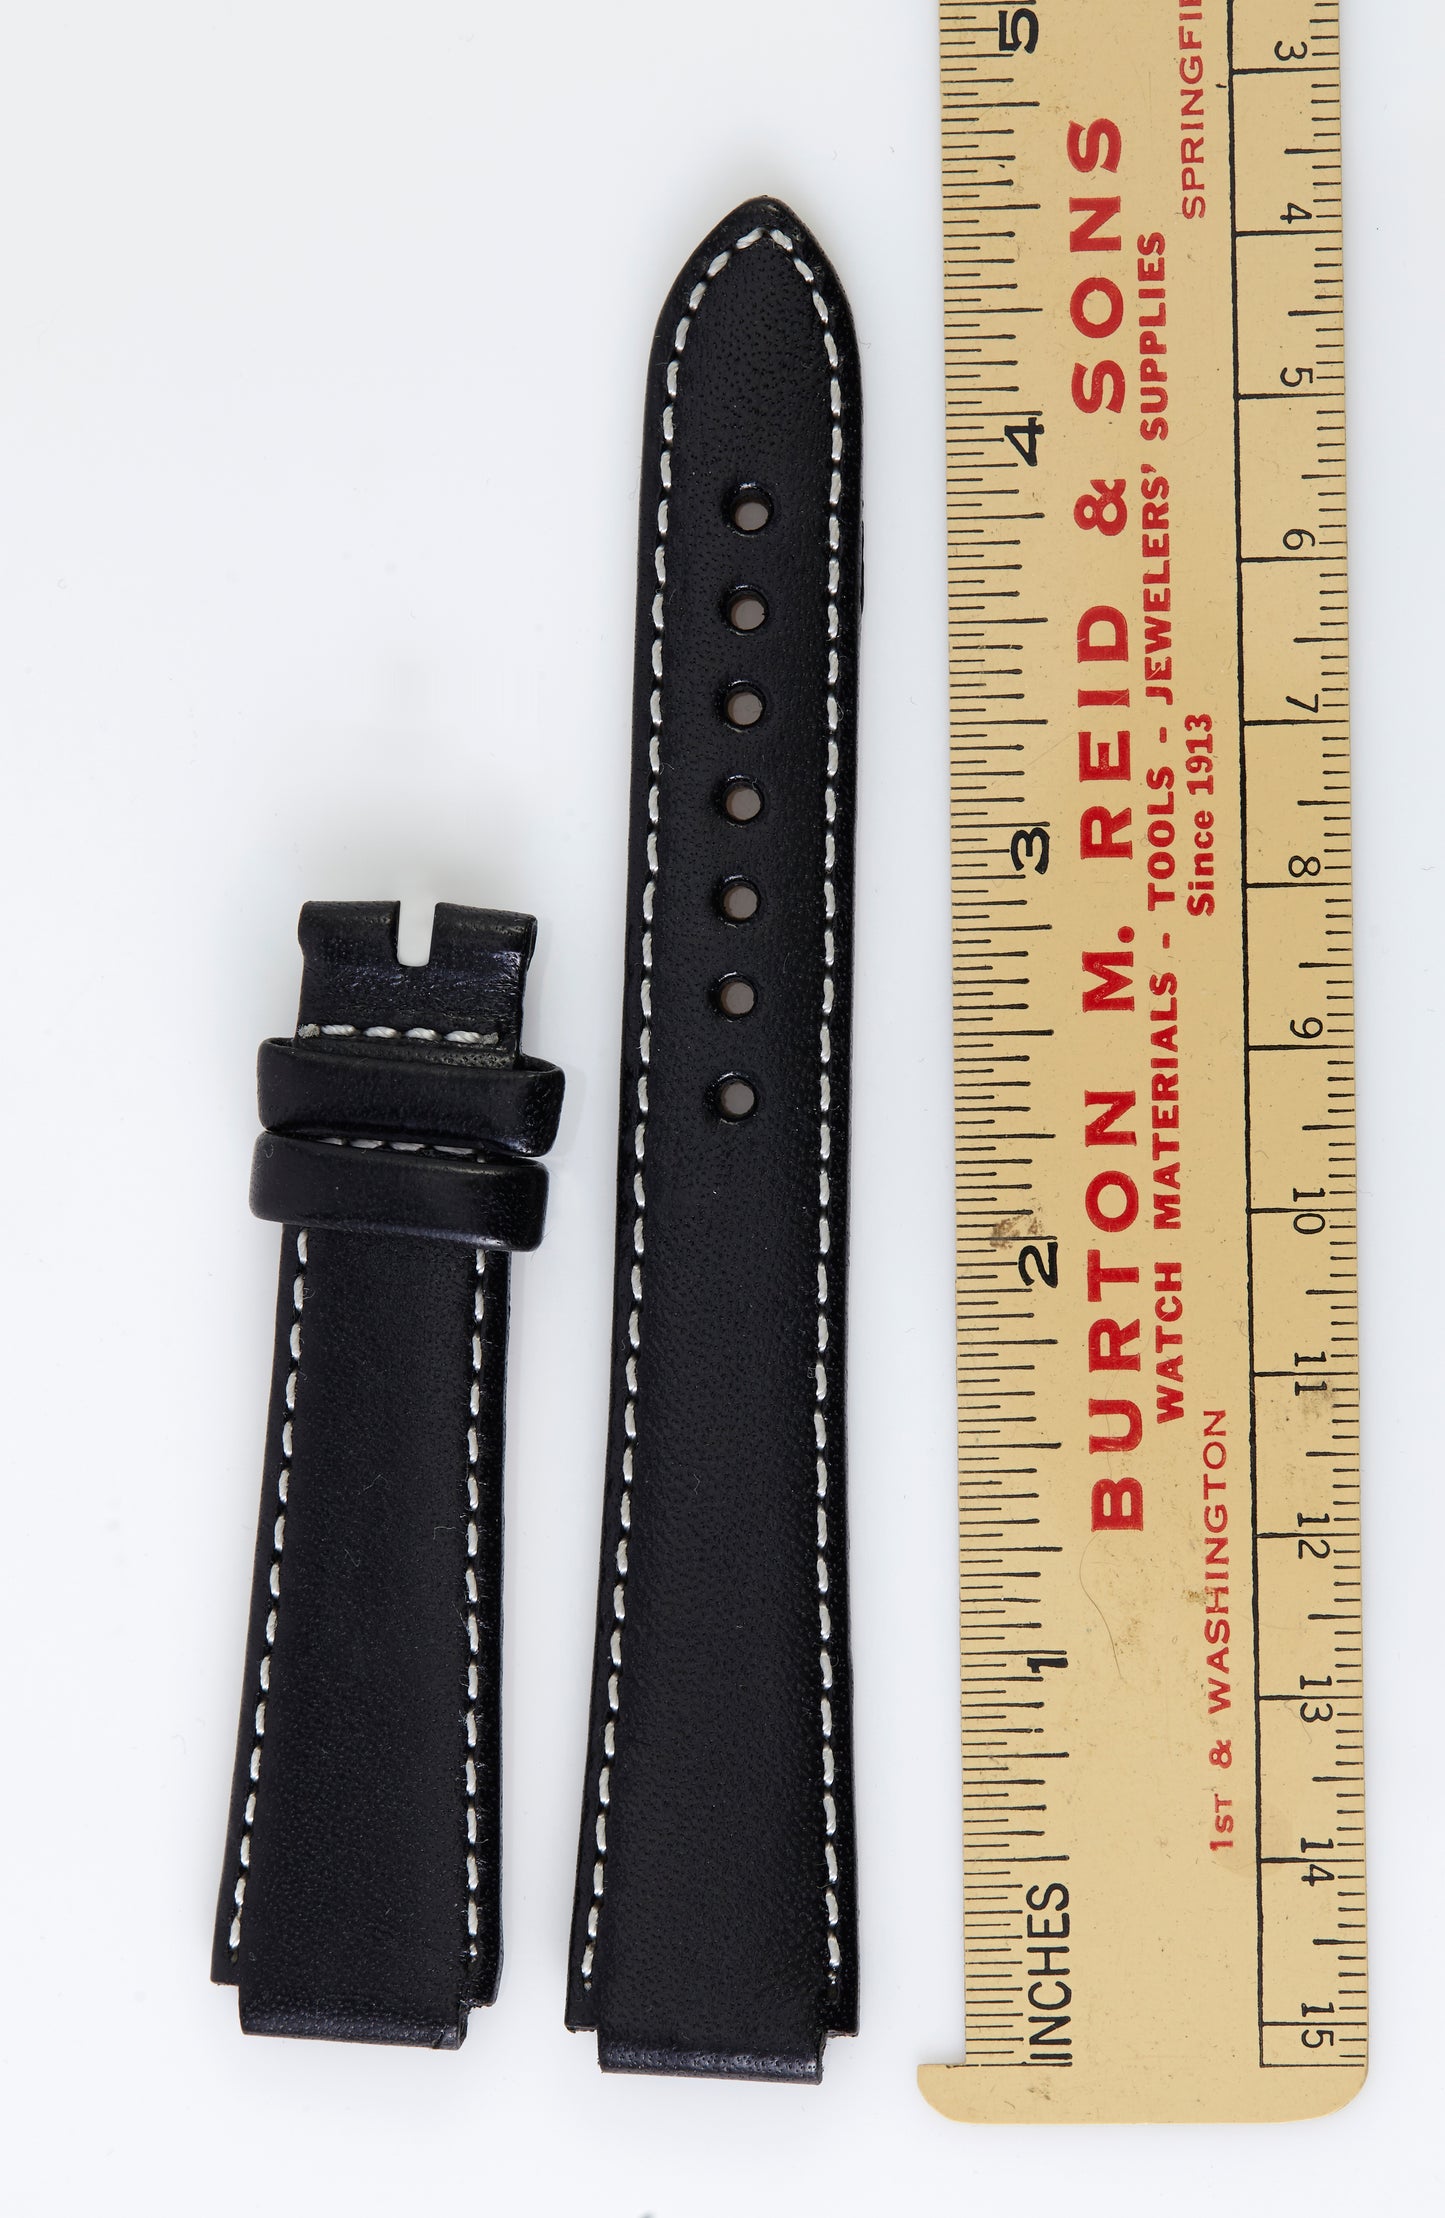 Ecclissi 14mm x 14mm Notched Black Leather Strap 22590